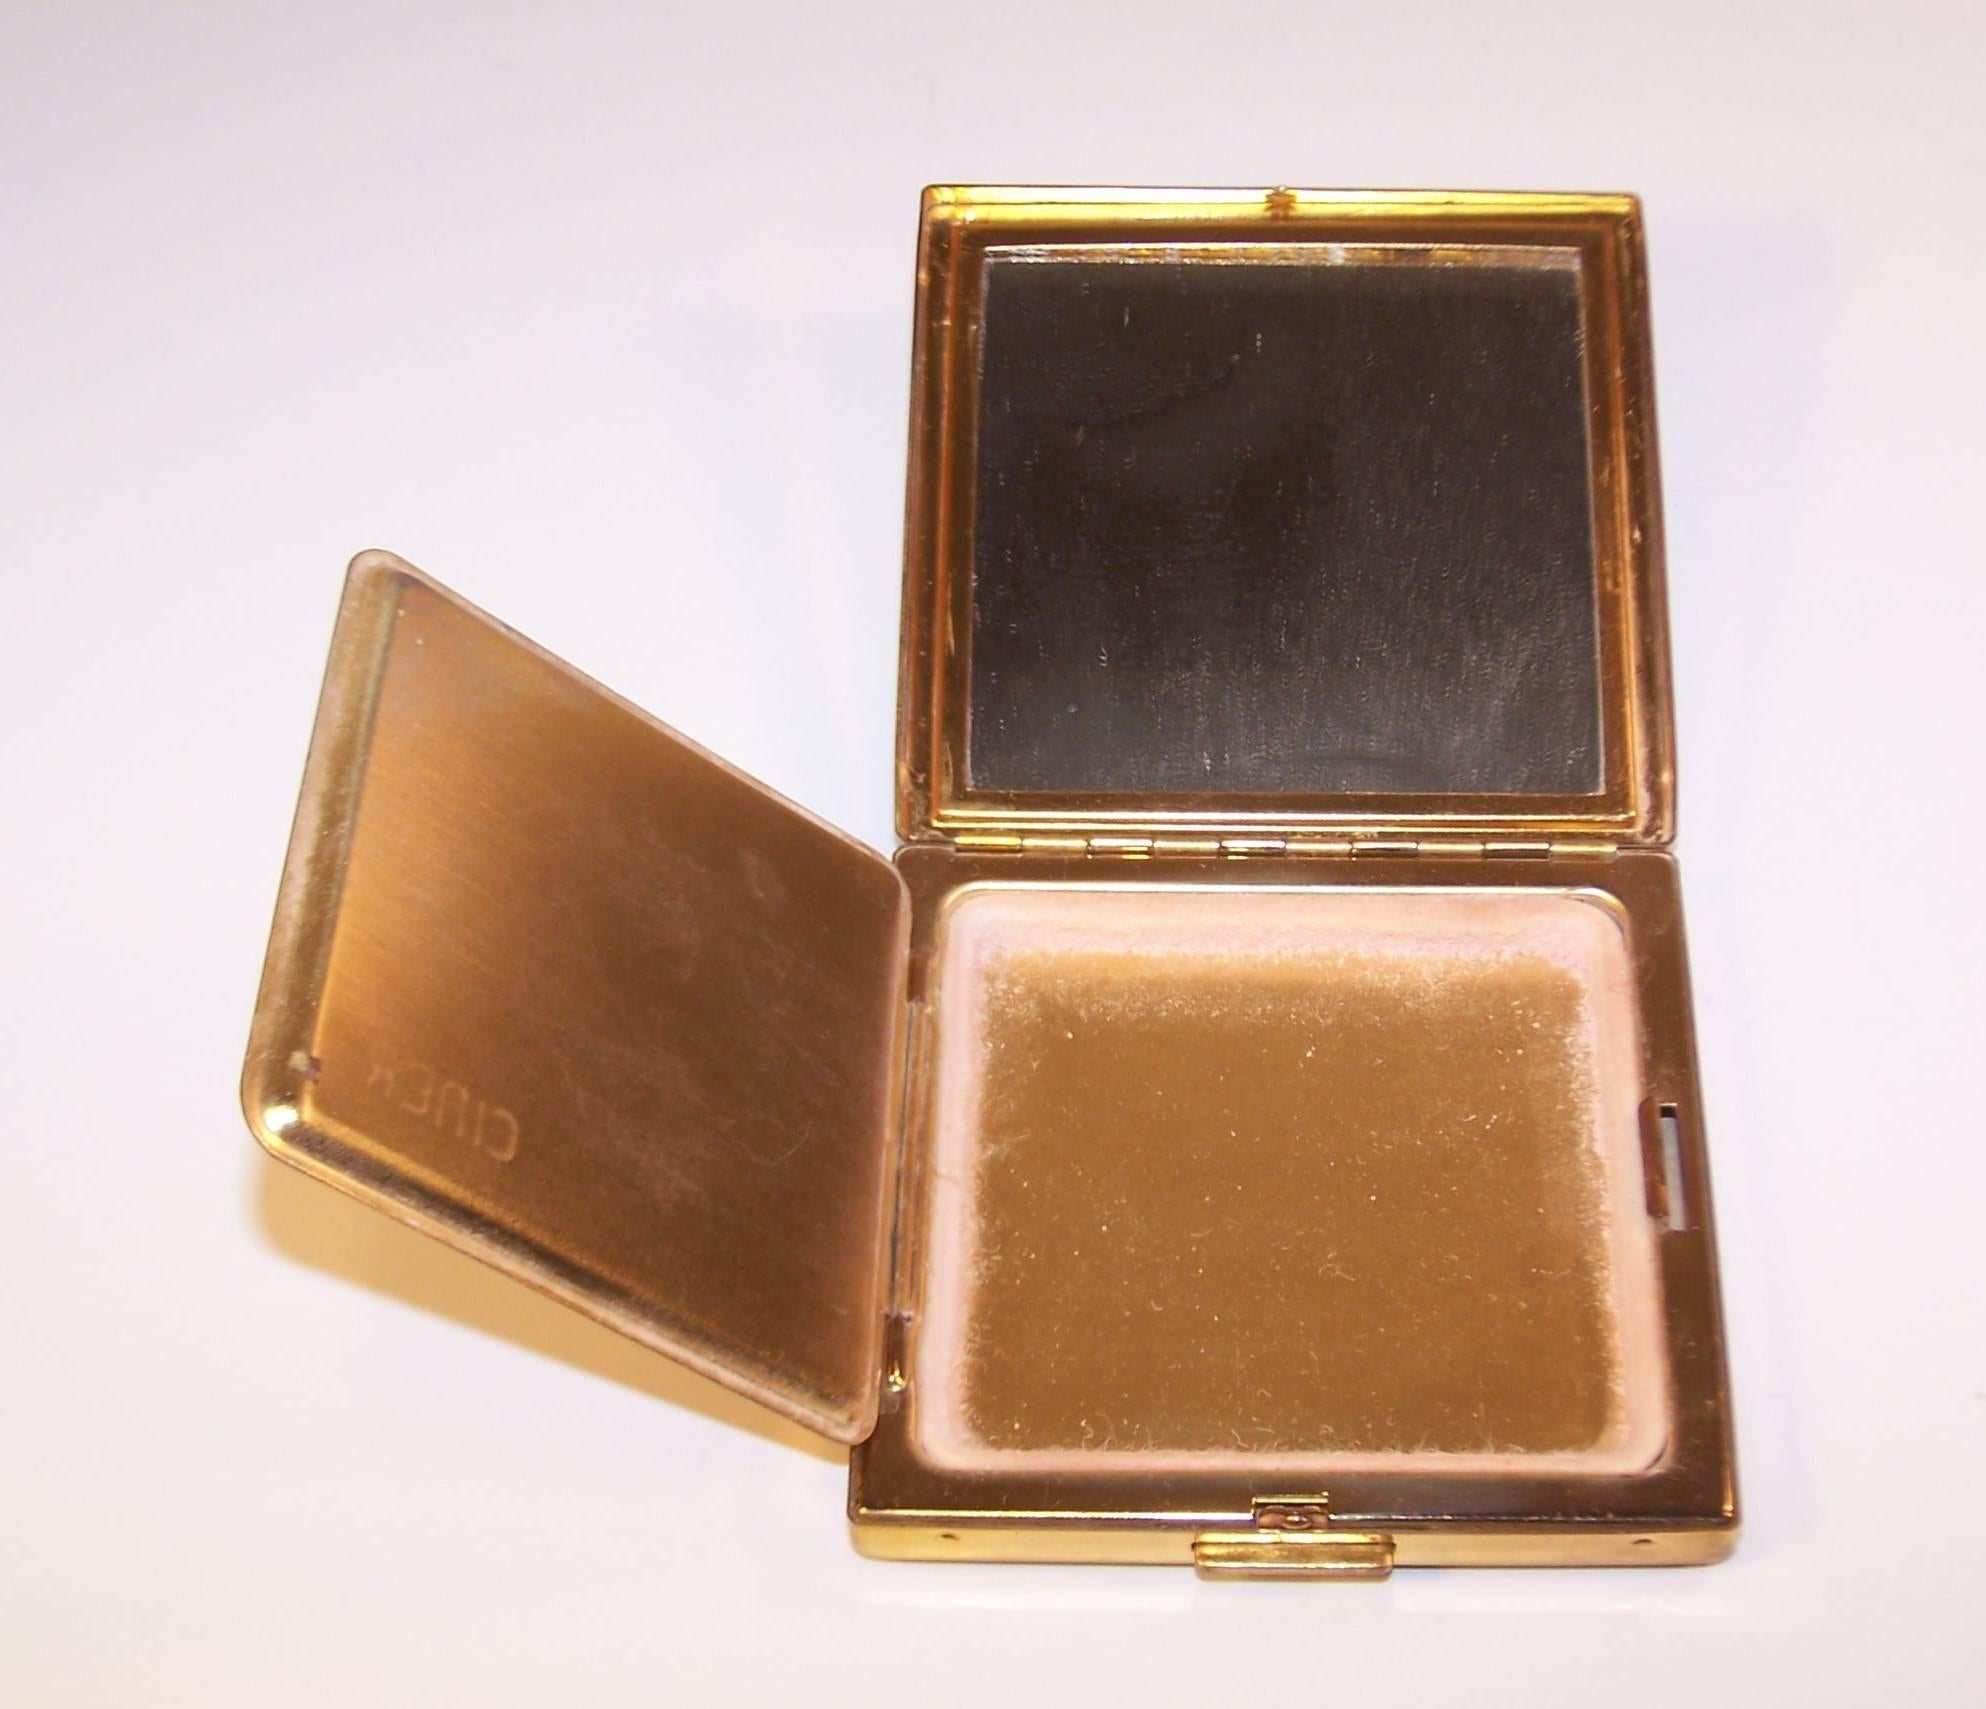 Alligators Abound 1950's Ciner Leather Covered Powder Compact With Lipstick 2